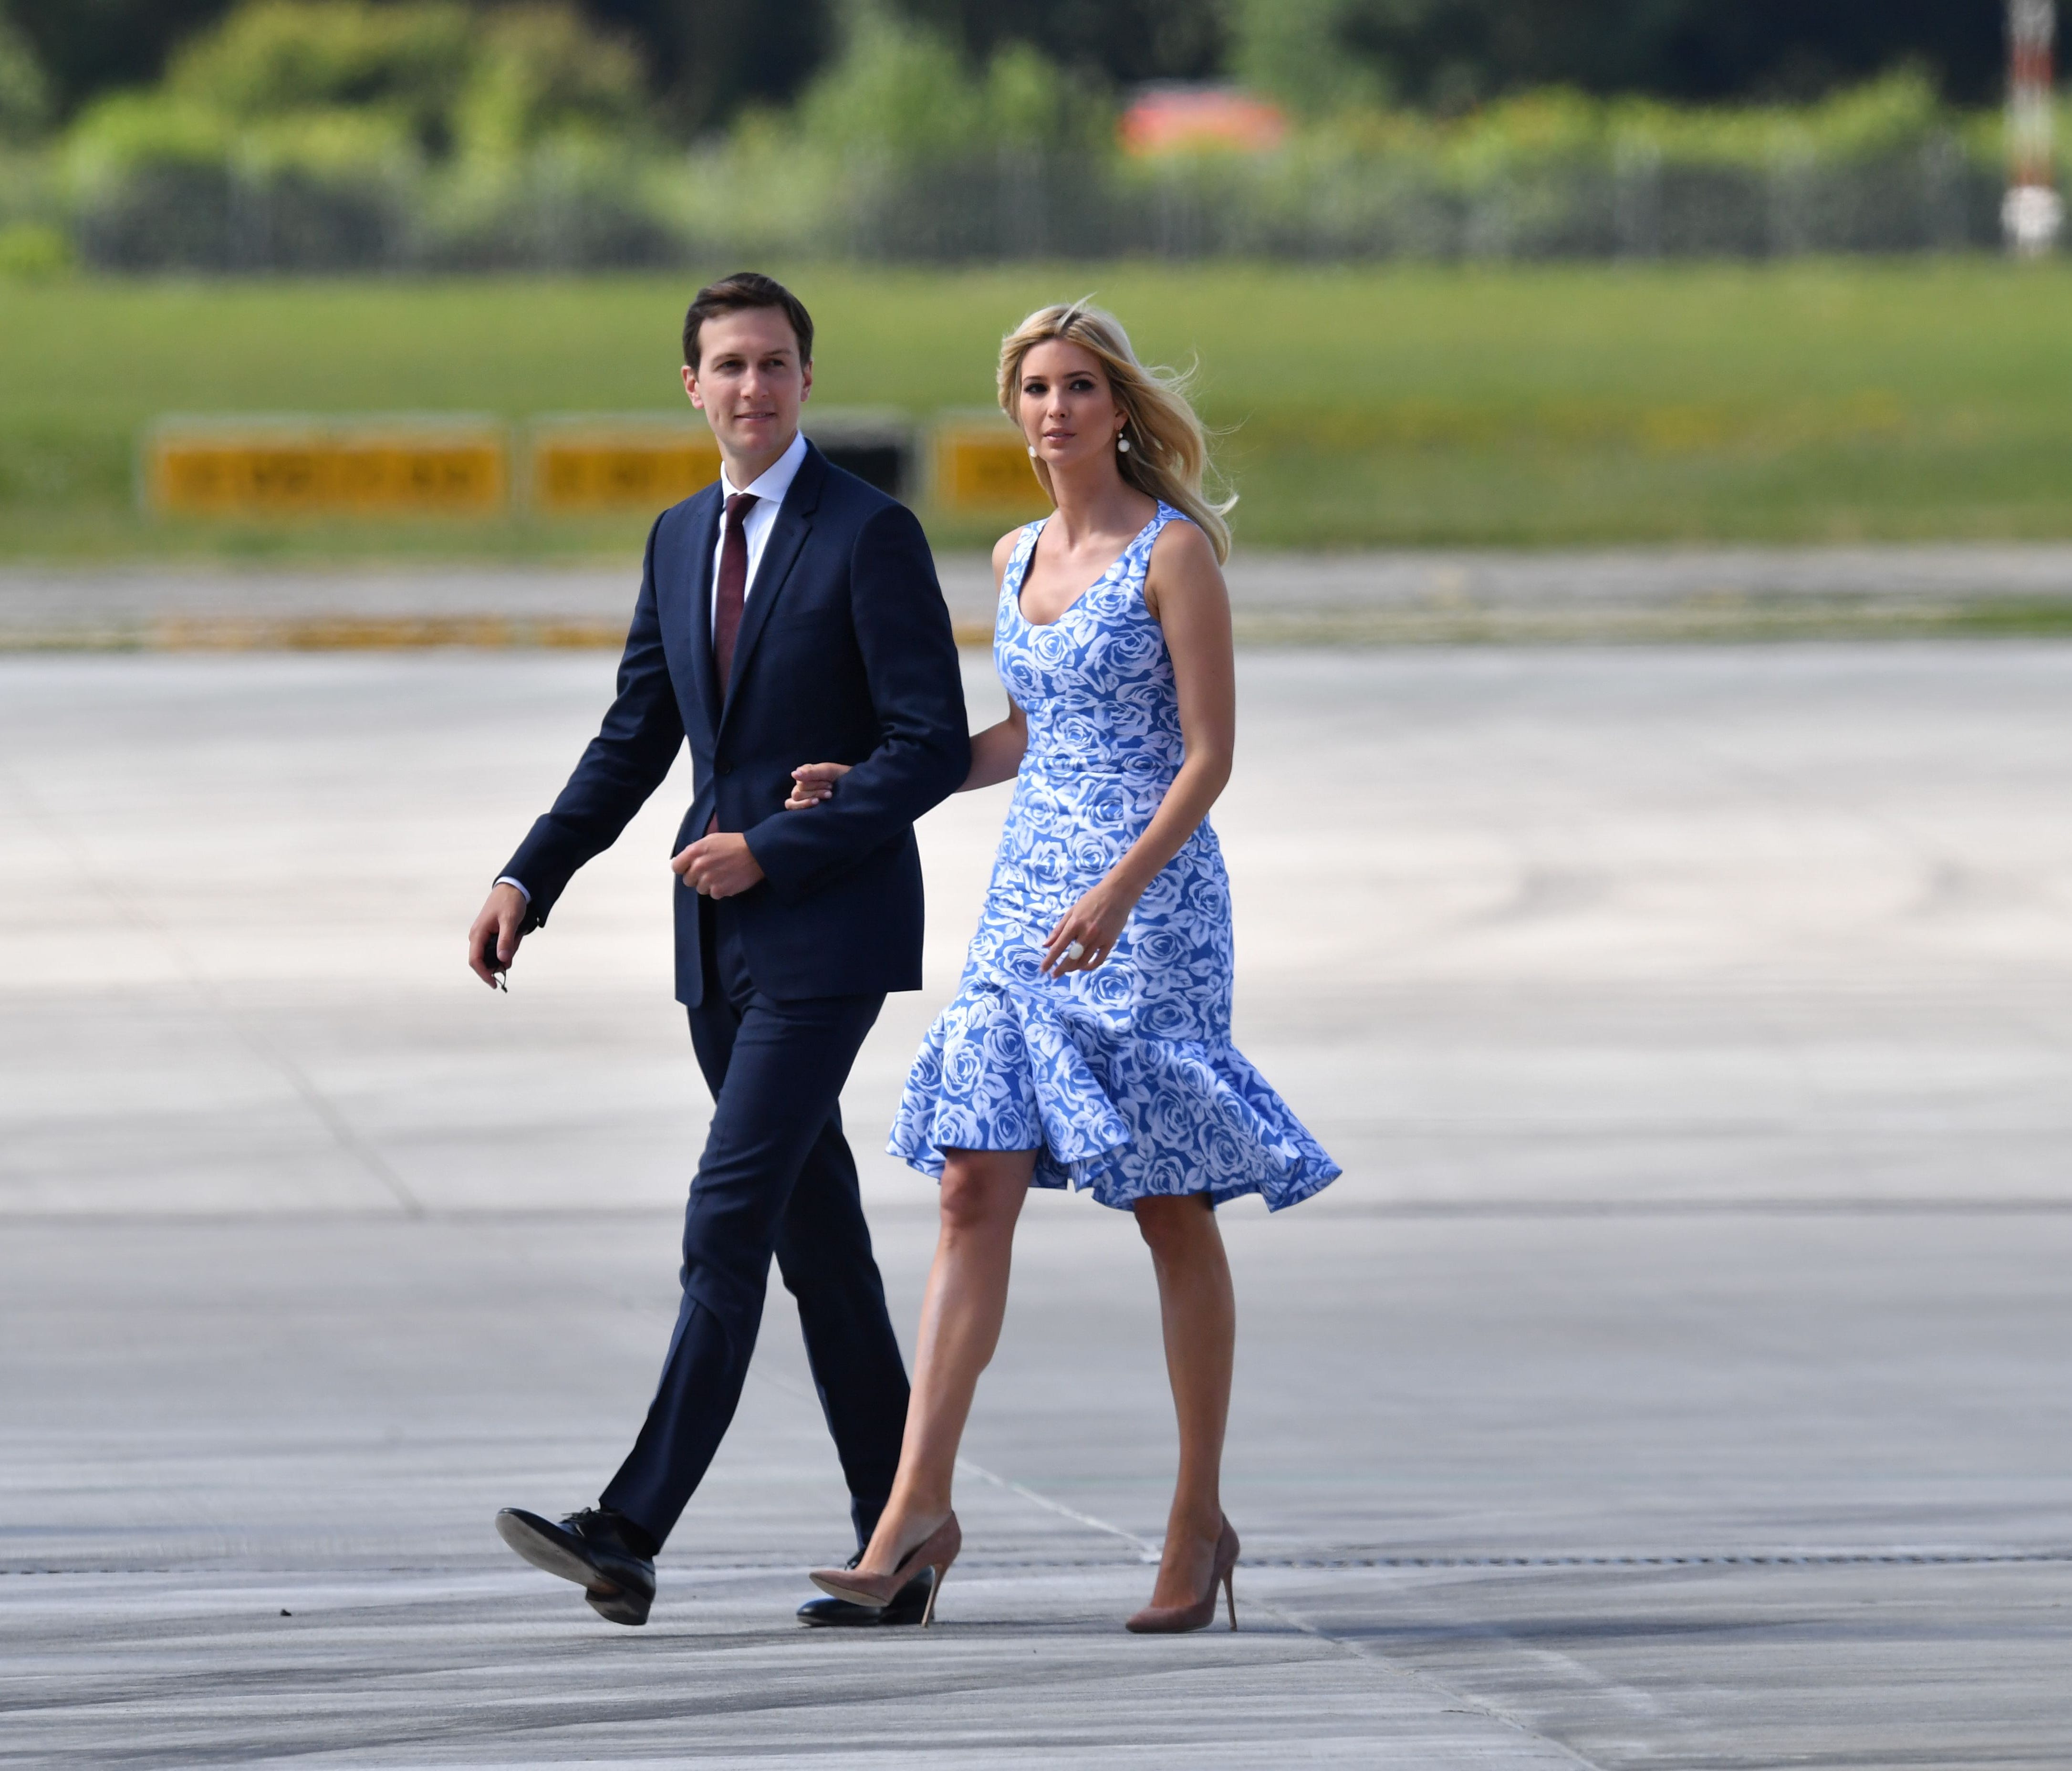 Kushner and wife Ivanka Trump make their way from  Air Force One to Marine One upon arrival at the airport in Hamburg on July 6, 2017.